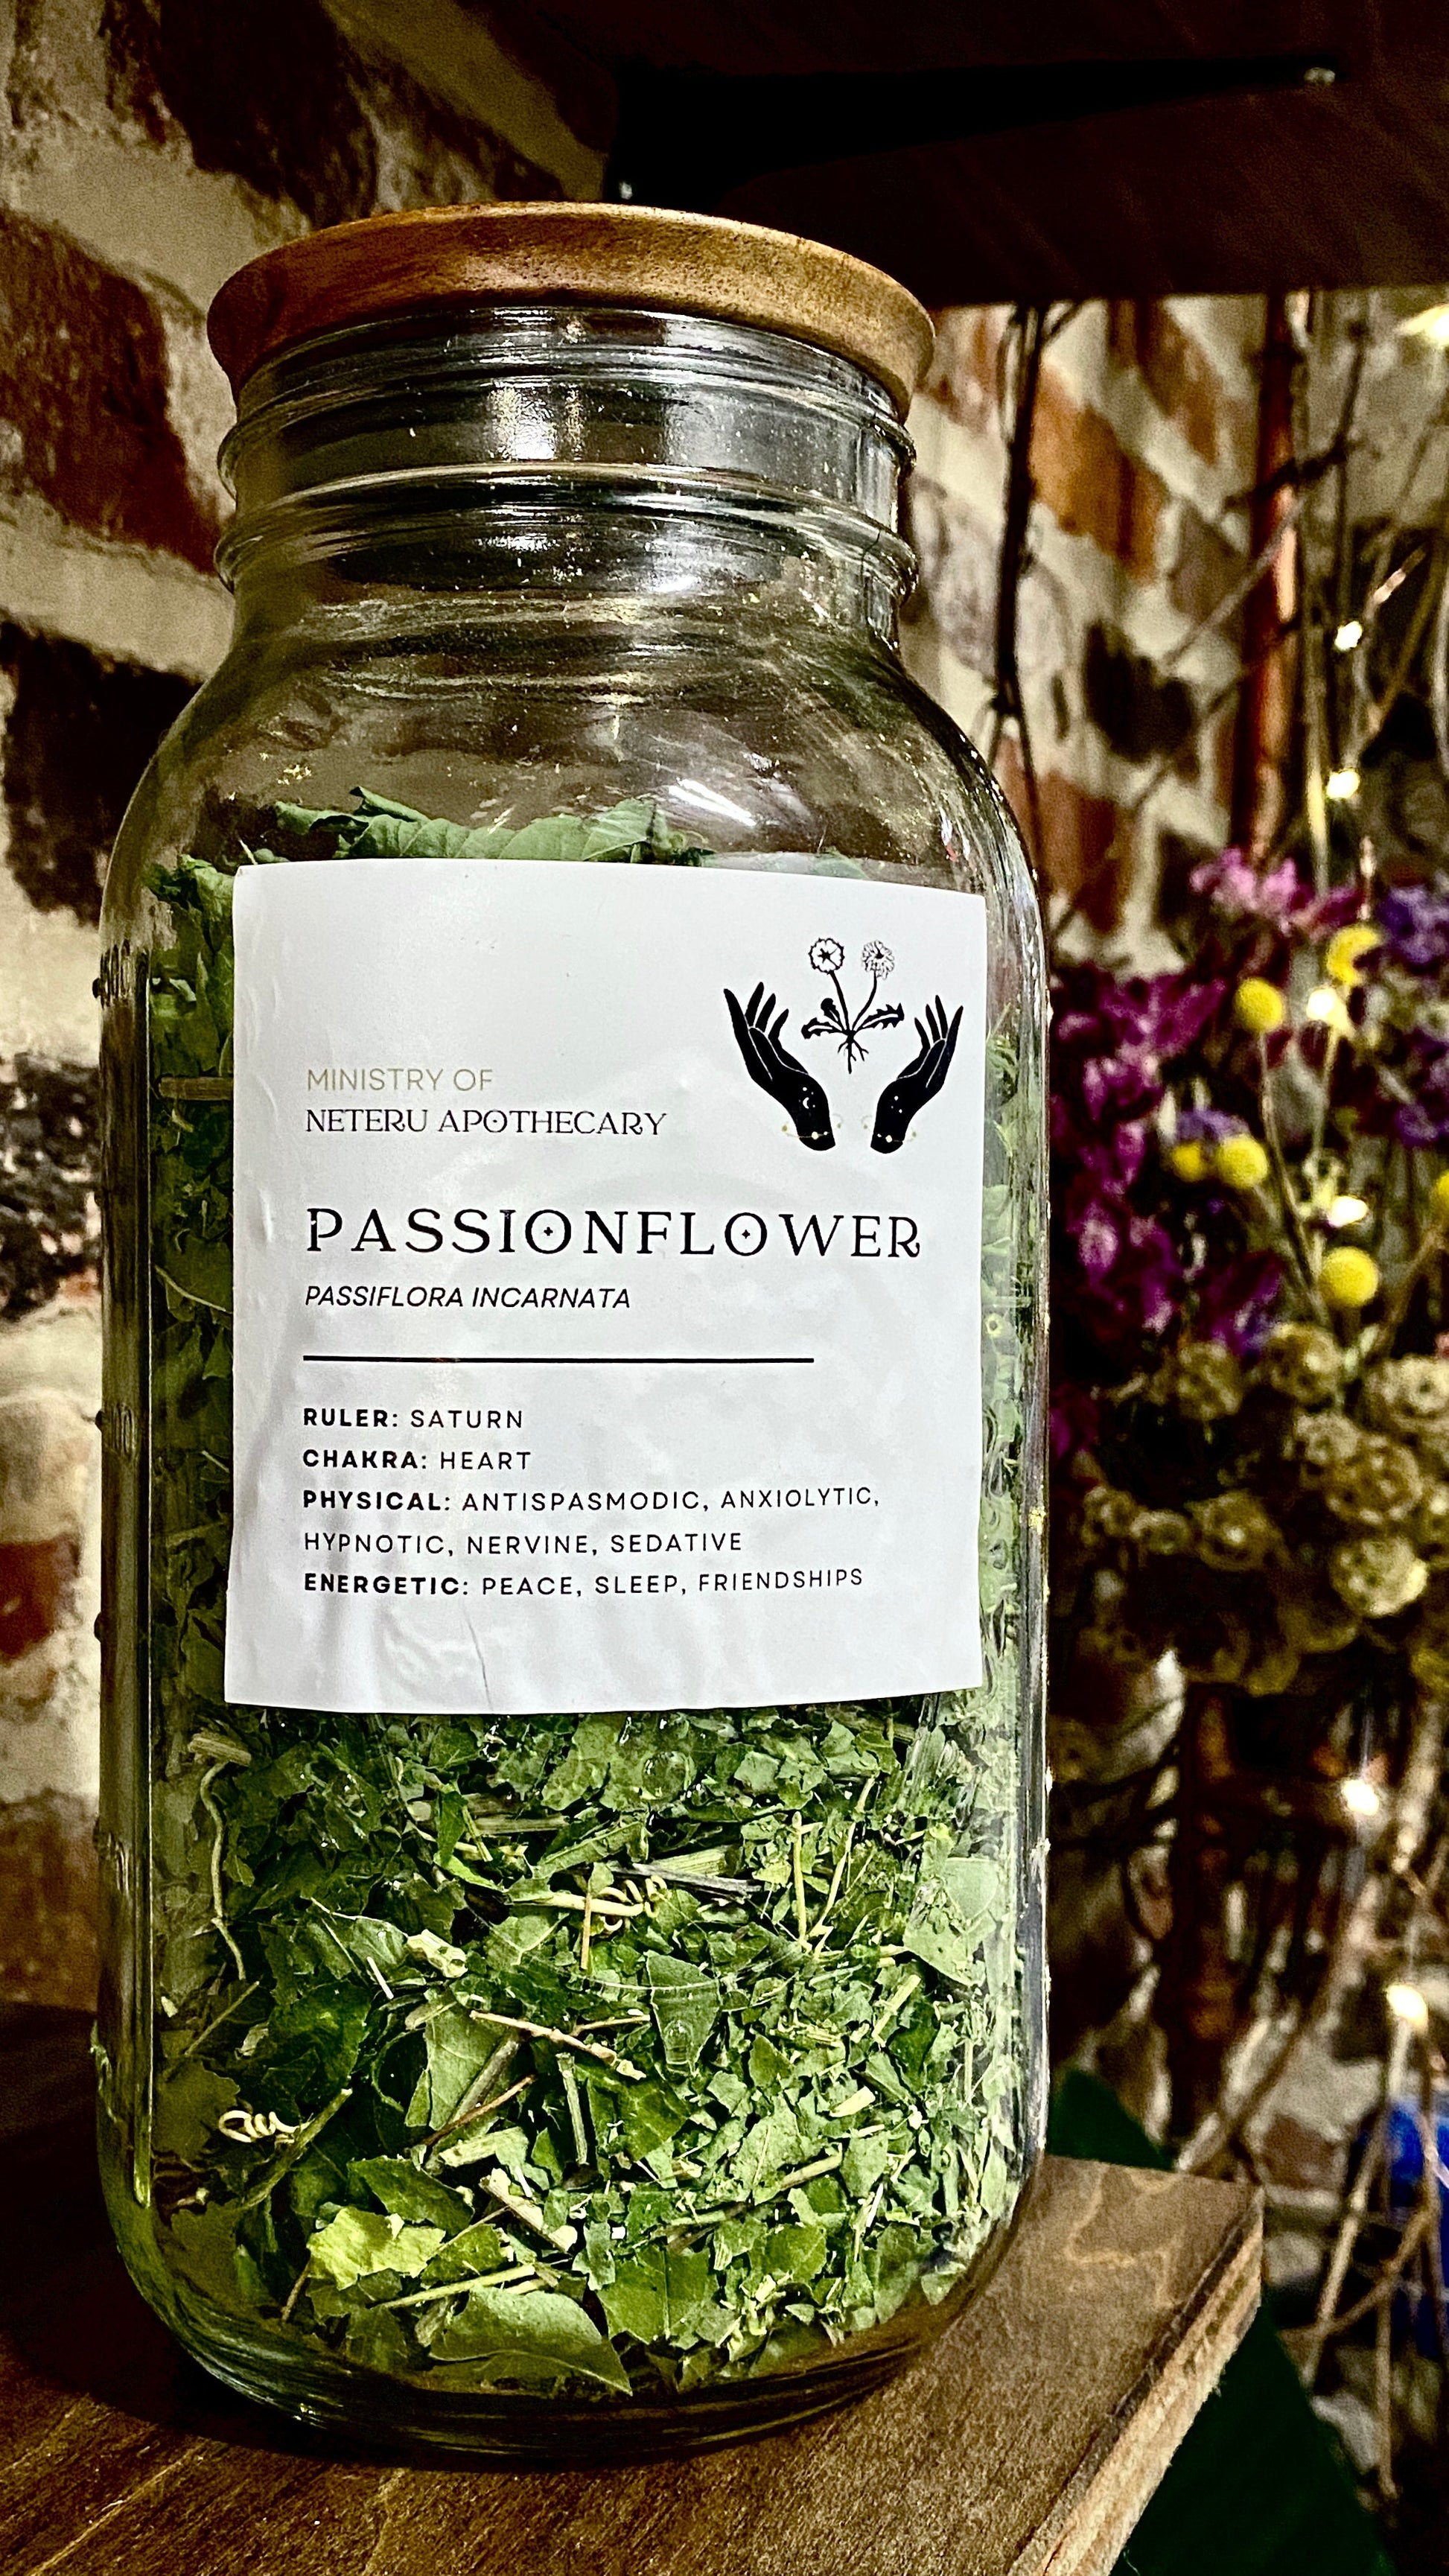 Passionflower/Maypop Leaf Organic - Ministry of Neteru Apothecary